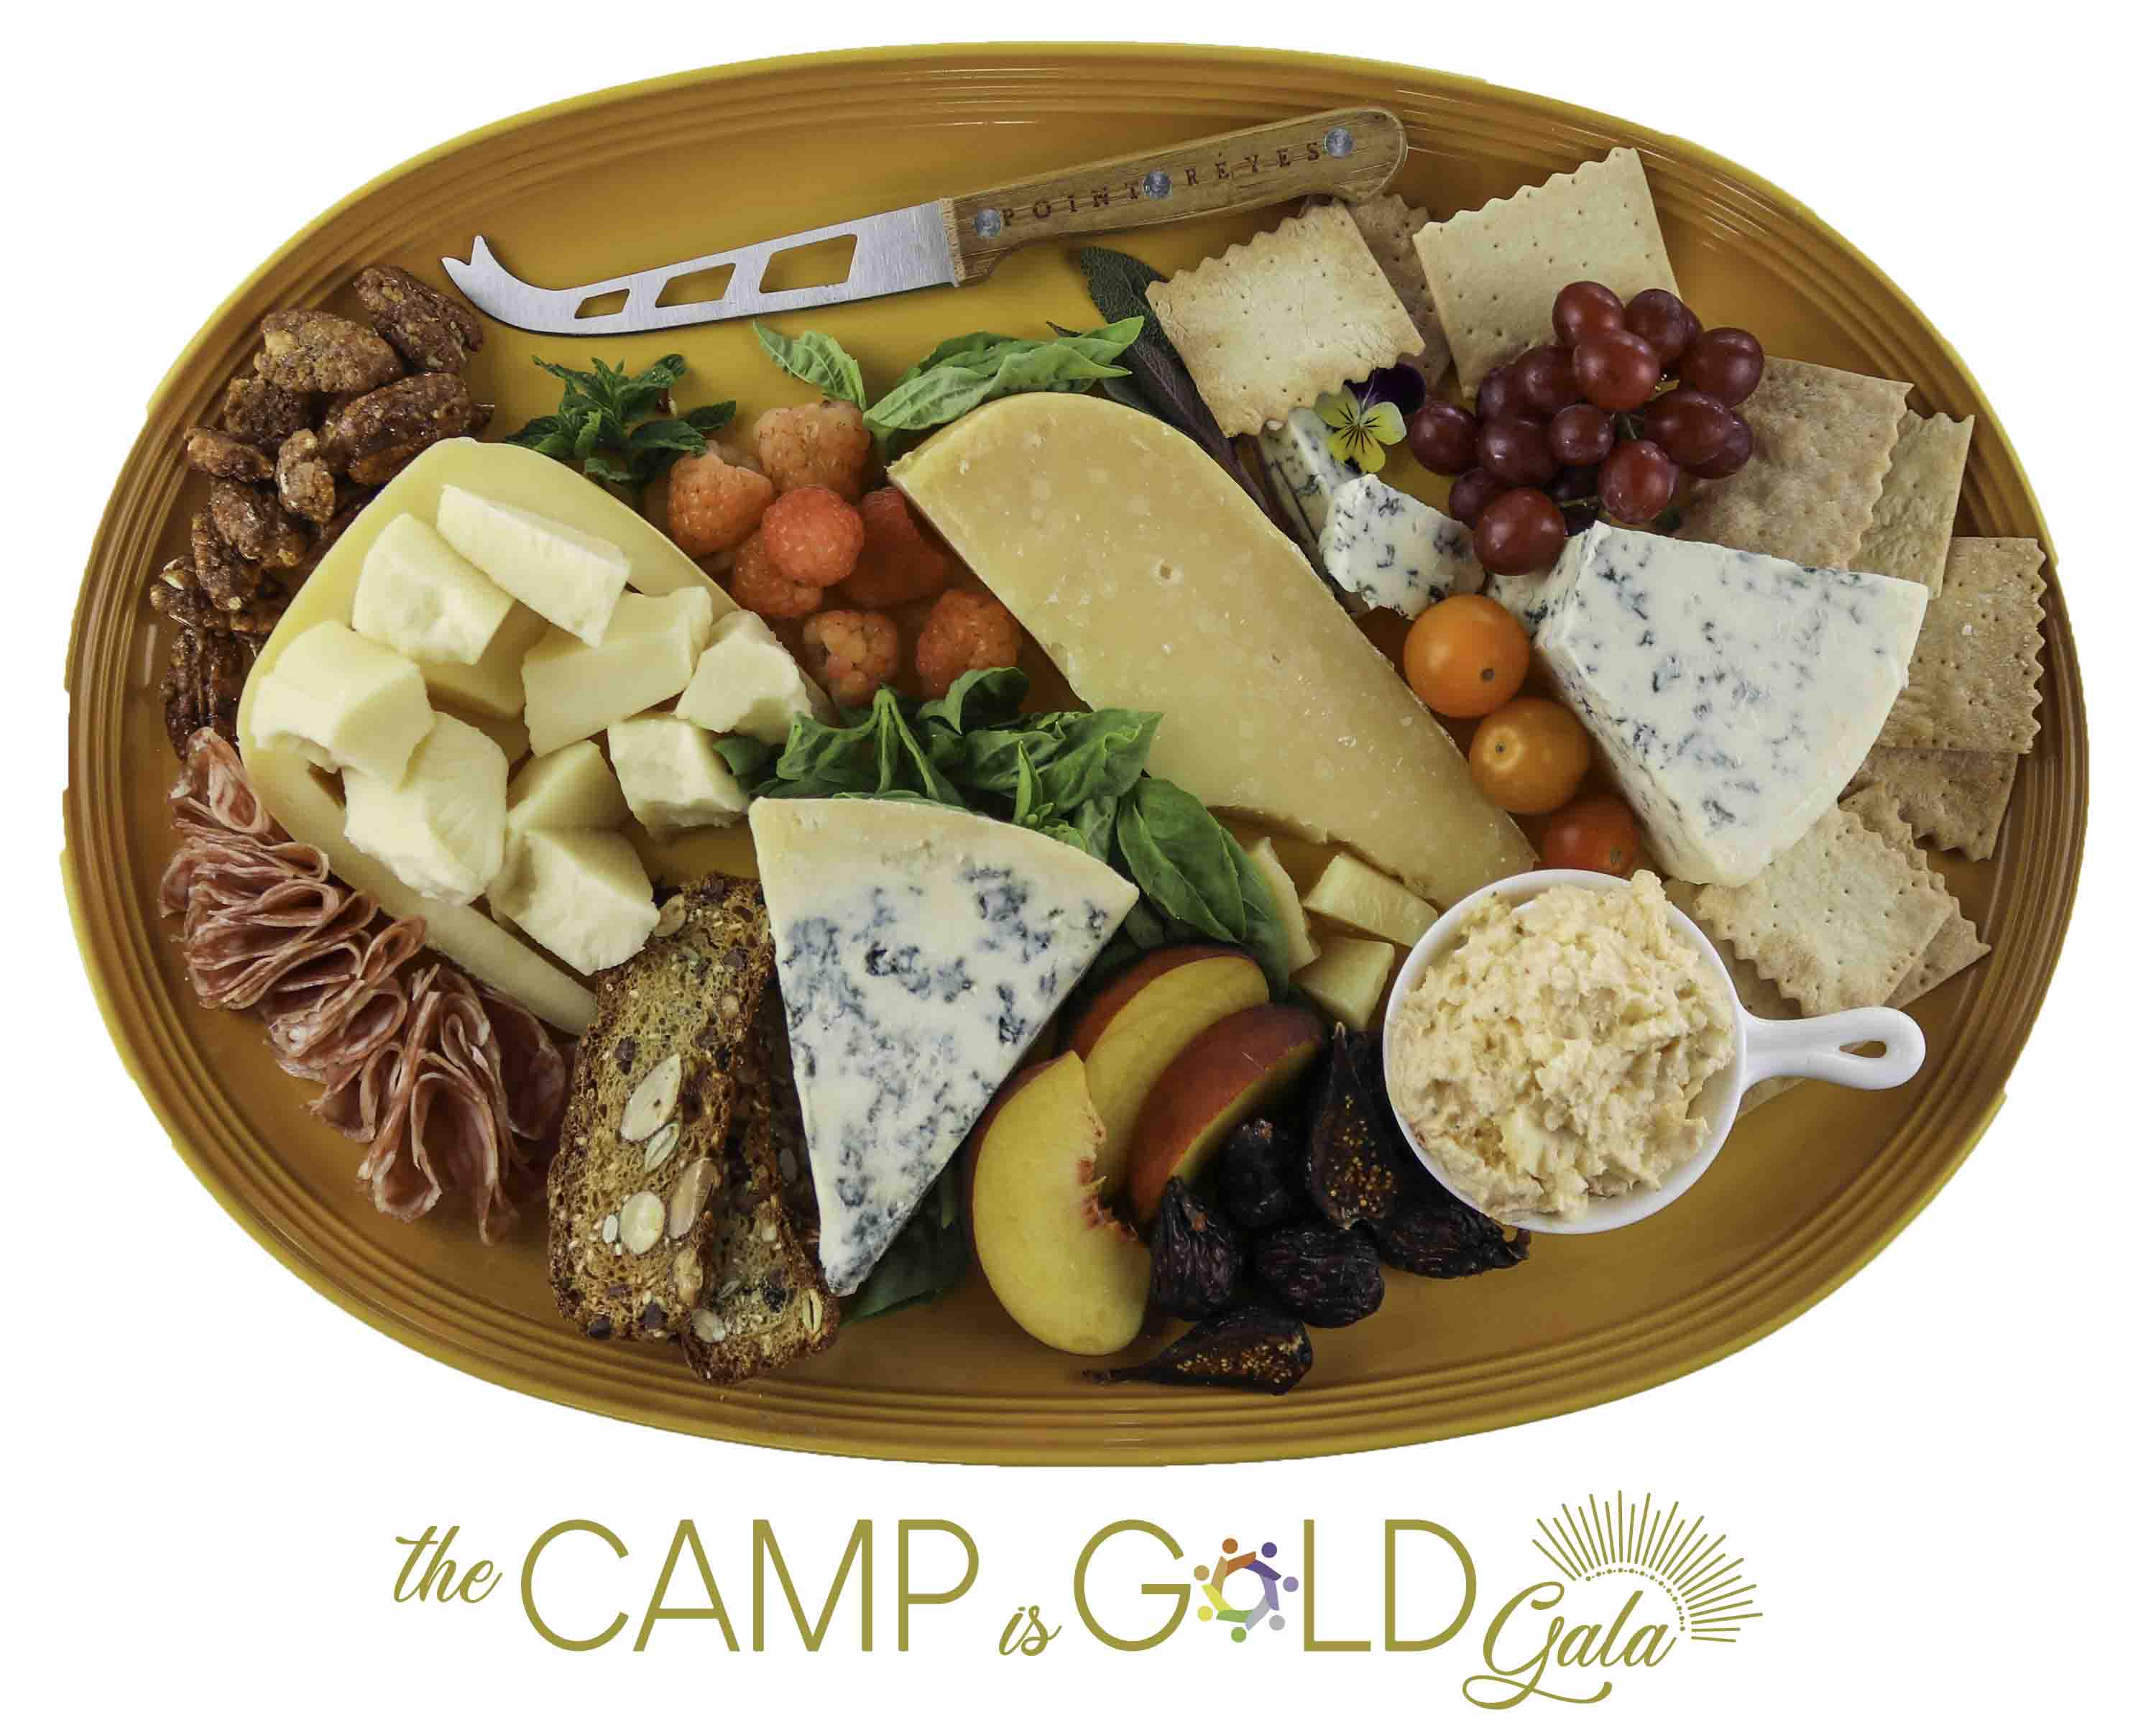 Cheese Cares: Supporting Camp One Step in the Fight Against Childhood Cancer